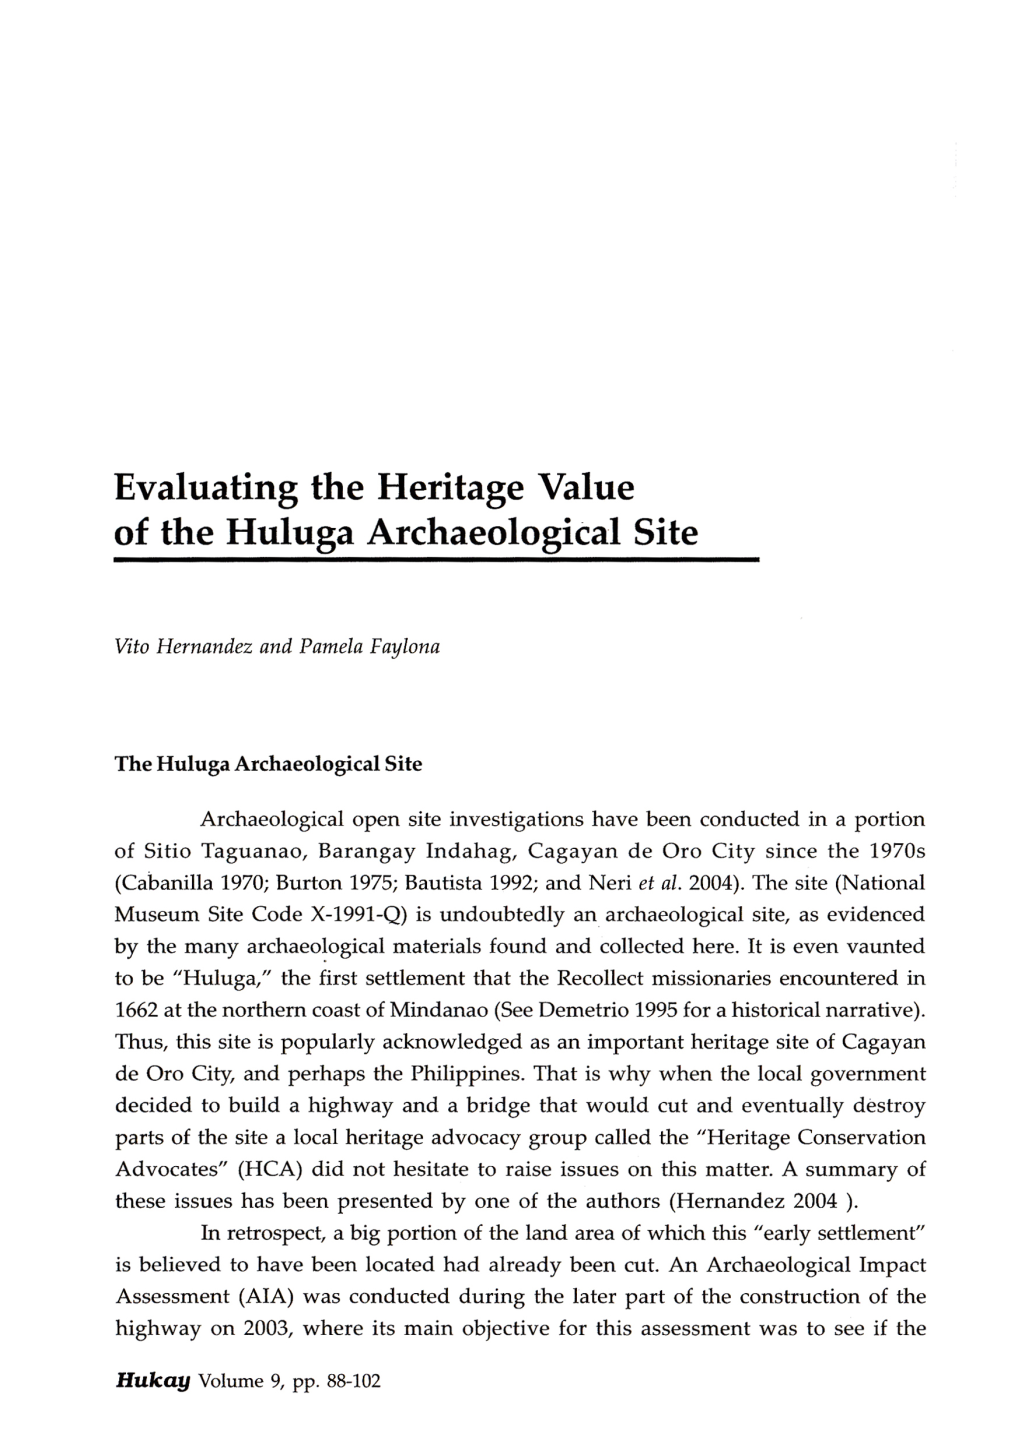 Evaluating the Heritage Value of the Huluga Archaeological Site